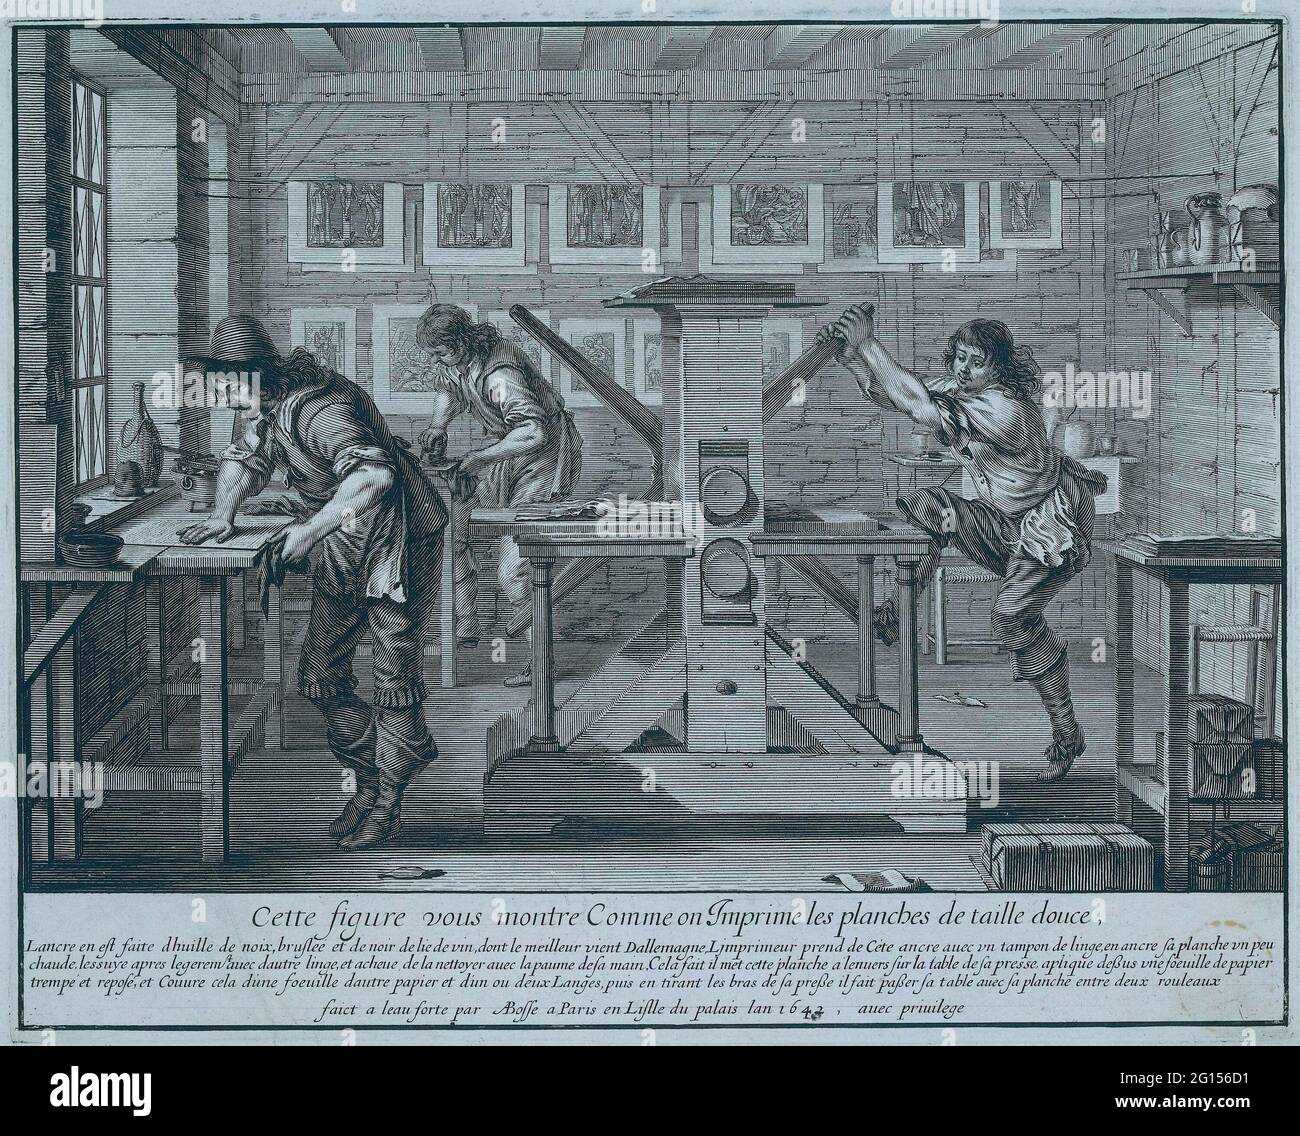 PRINT PRESSURE. Pressing etching is demonstrated in the workshop. The printer in the background rubs the ink on the plate. The man for the workbench 'sinks the plate' with the palm of his hand. The clean album, on which the ink is now only in the fine grooves, is printed on the etching press. Stock Photo